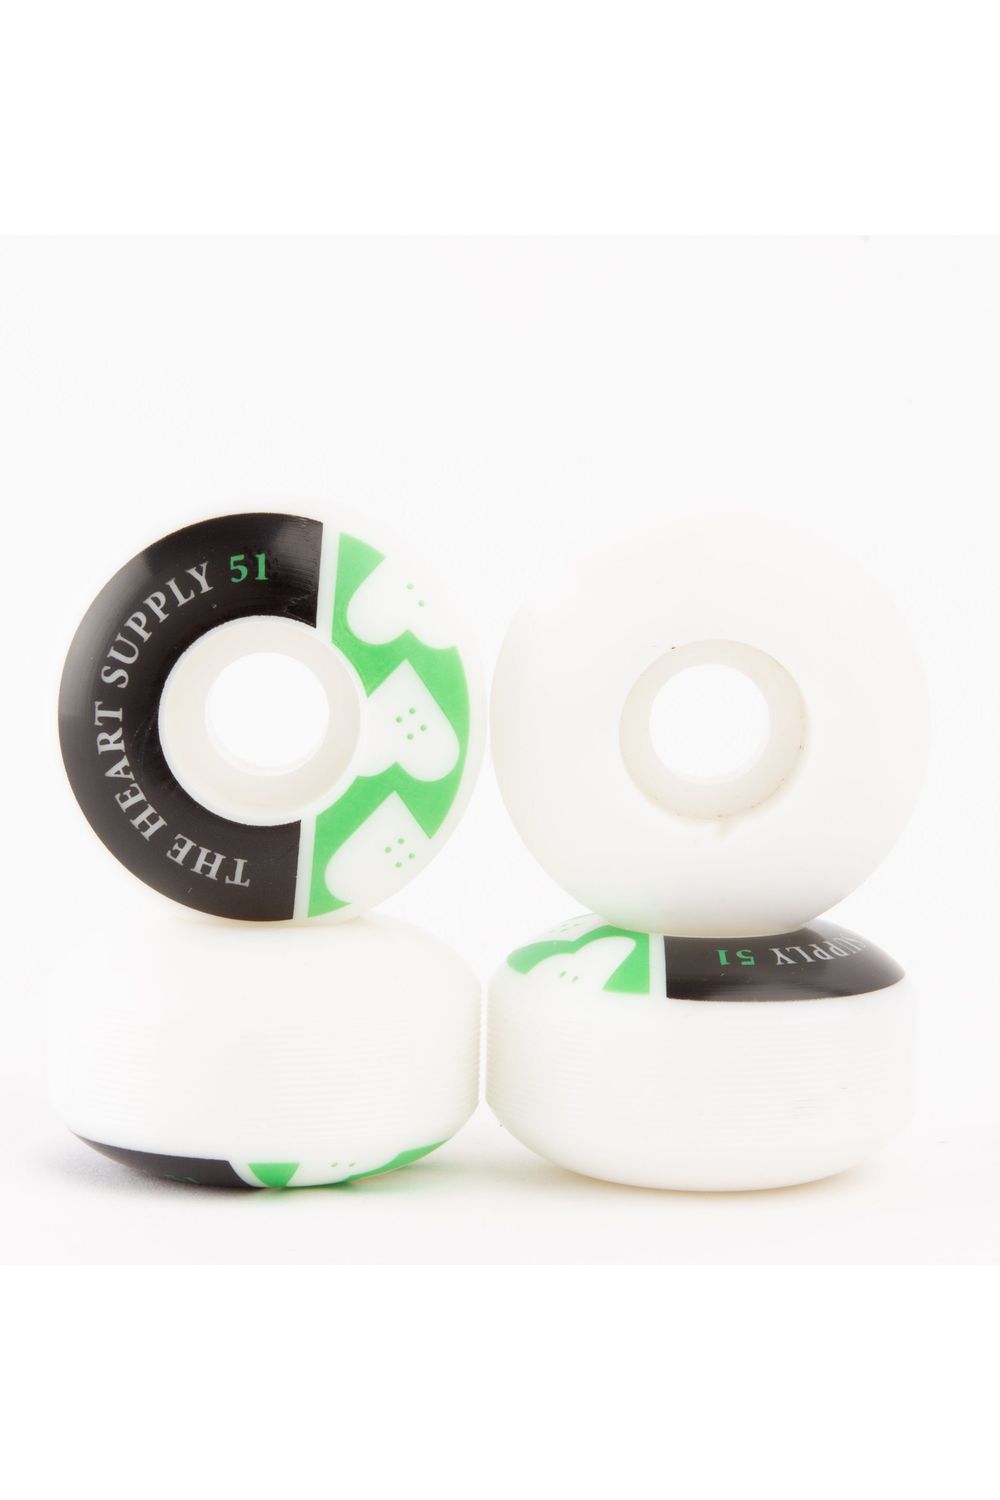 The Heart Supply Squad Wheels 51mm